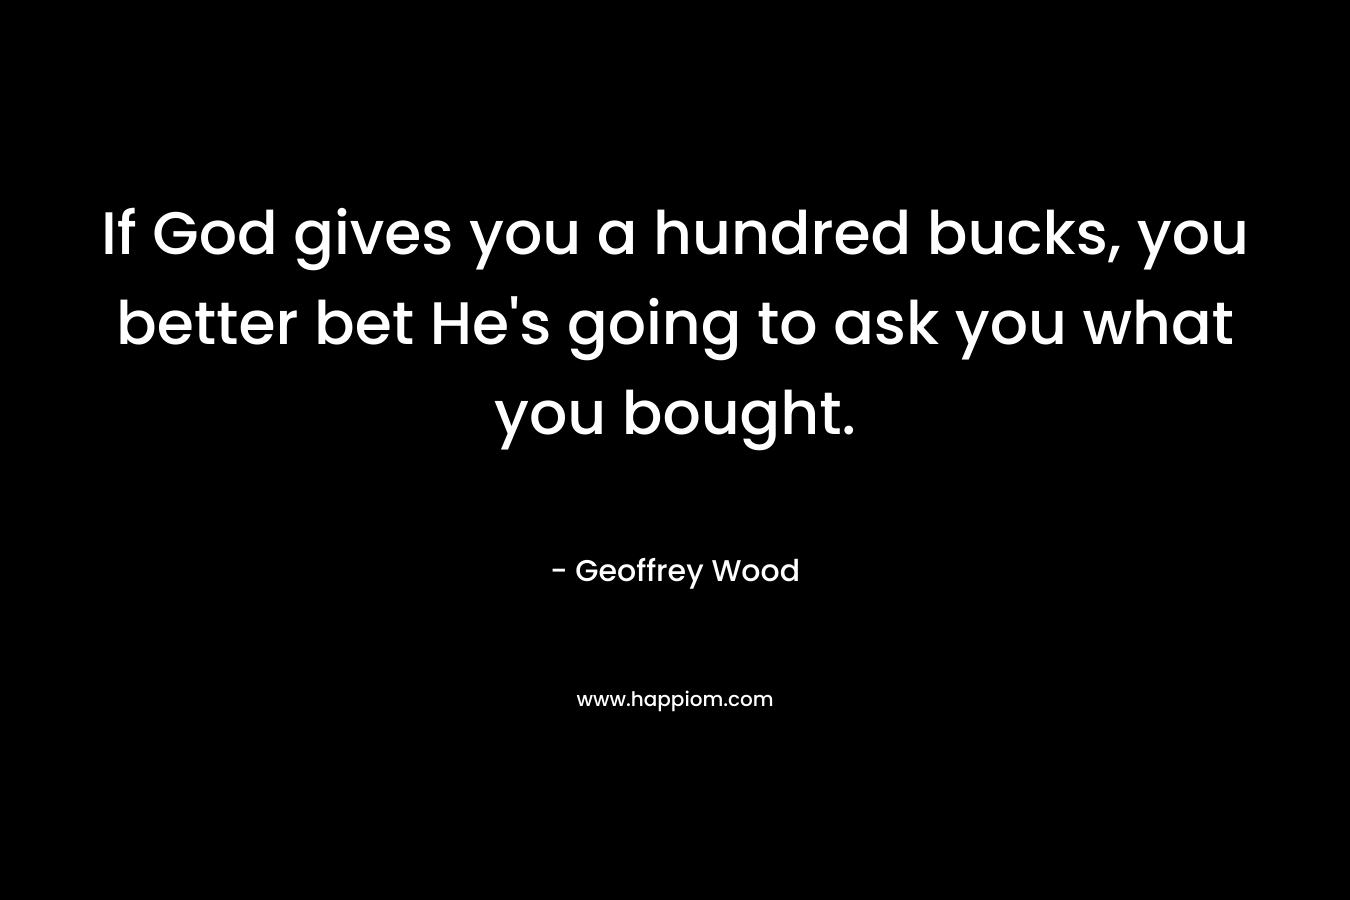 If God gives you a hundred bucks, you better bet He’s going to ask you what you bought. – Geoffrey Wood